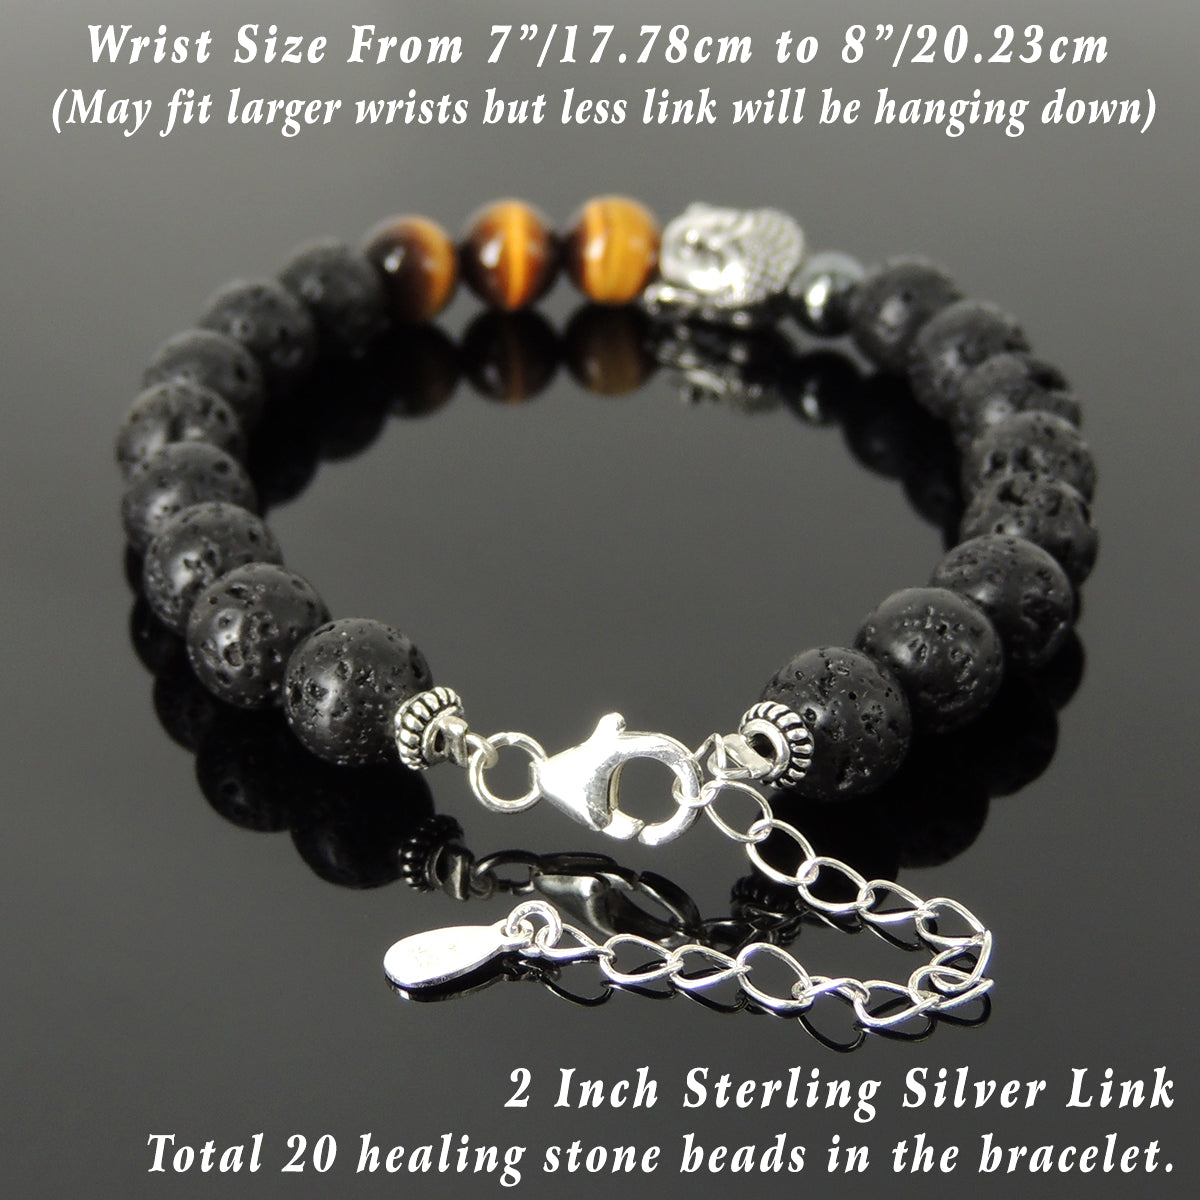 Grade 3A Brown Tiger Eye, Lava Rock, & Hematite Healing Stone Bracelet with S925 Sterling Silver Guanyin Buddha, Chain, & Clasp - Handmade by Gem & Silver BR1394